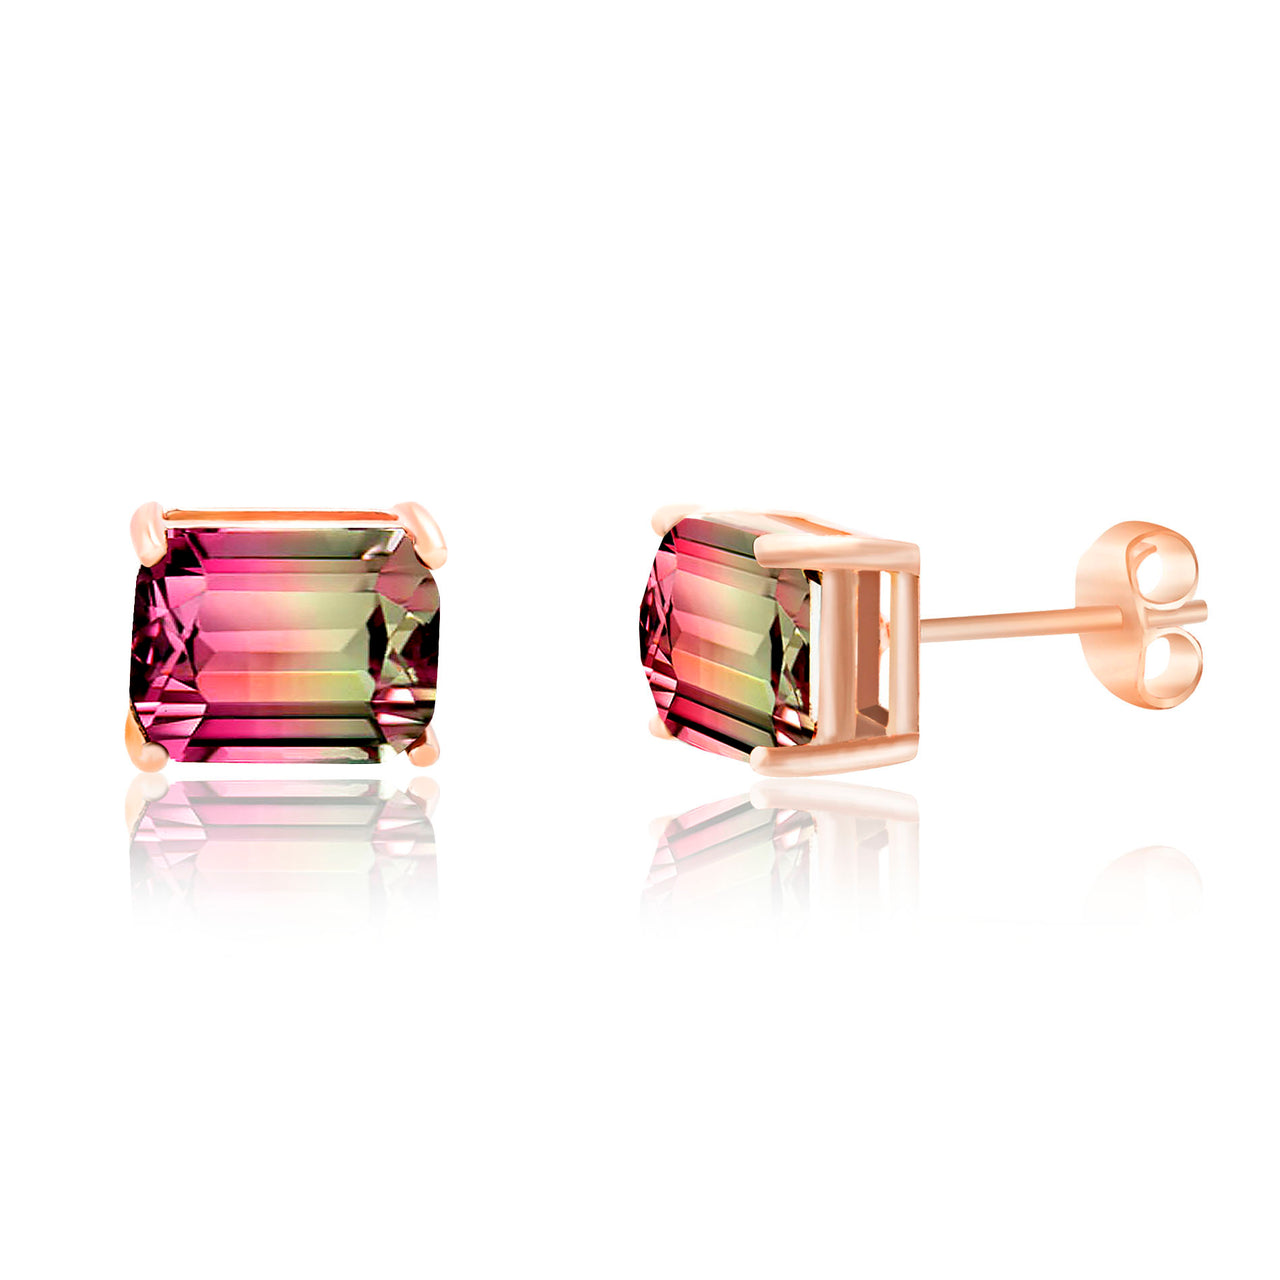 Lesa Michele Watermelon Tourmaline Rectangle Stud Earrings in Rose Gold Plated Sterling Silver